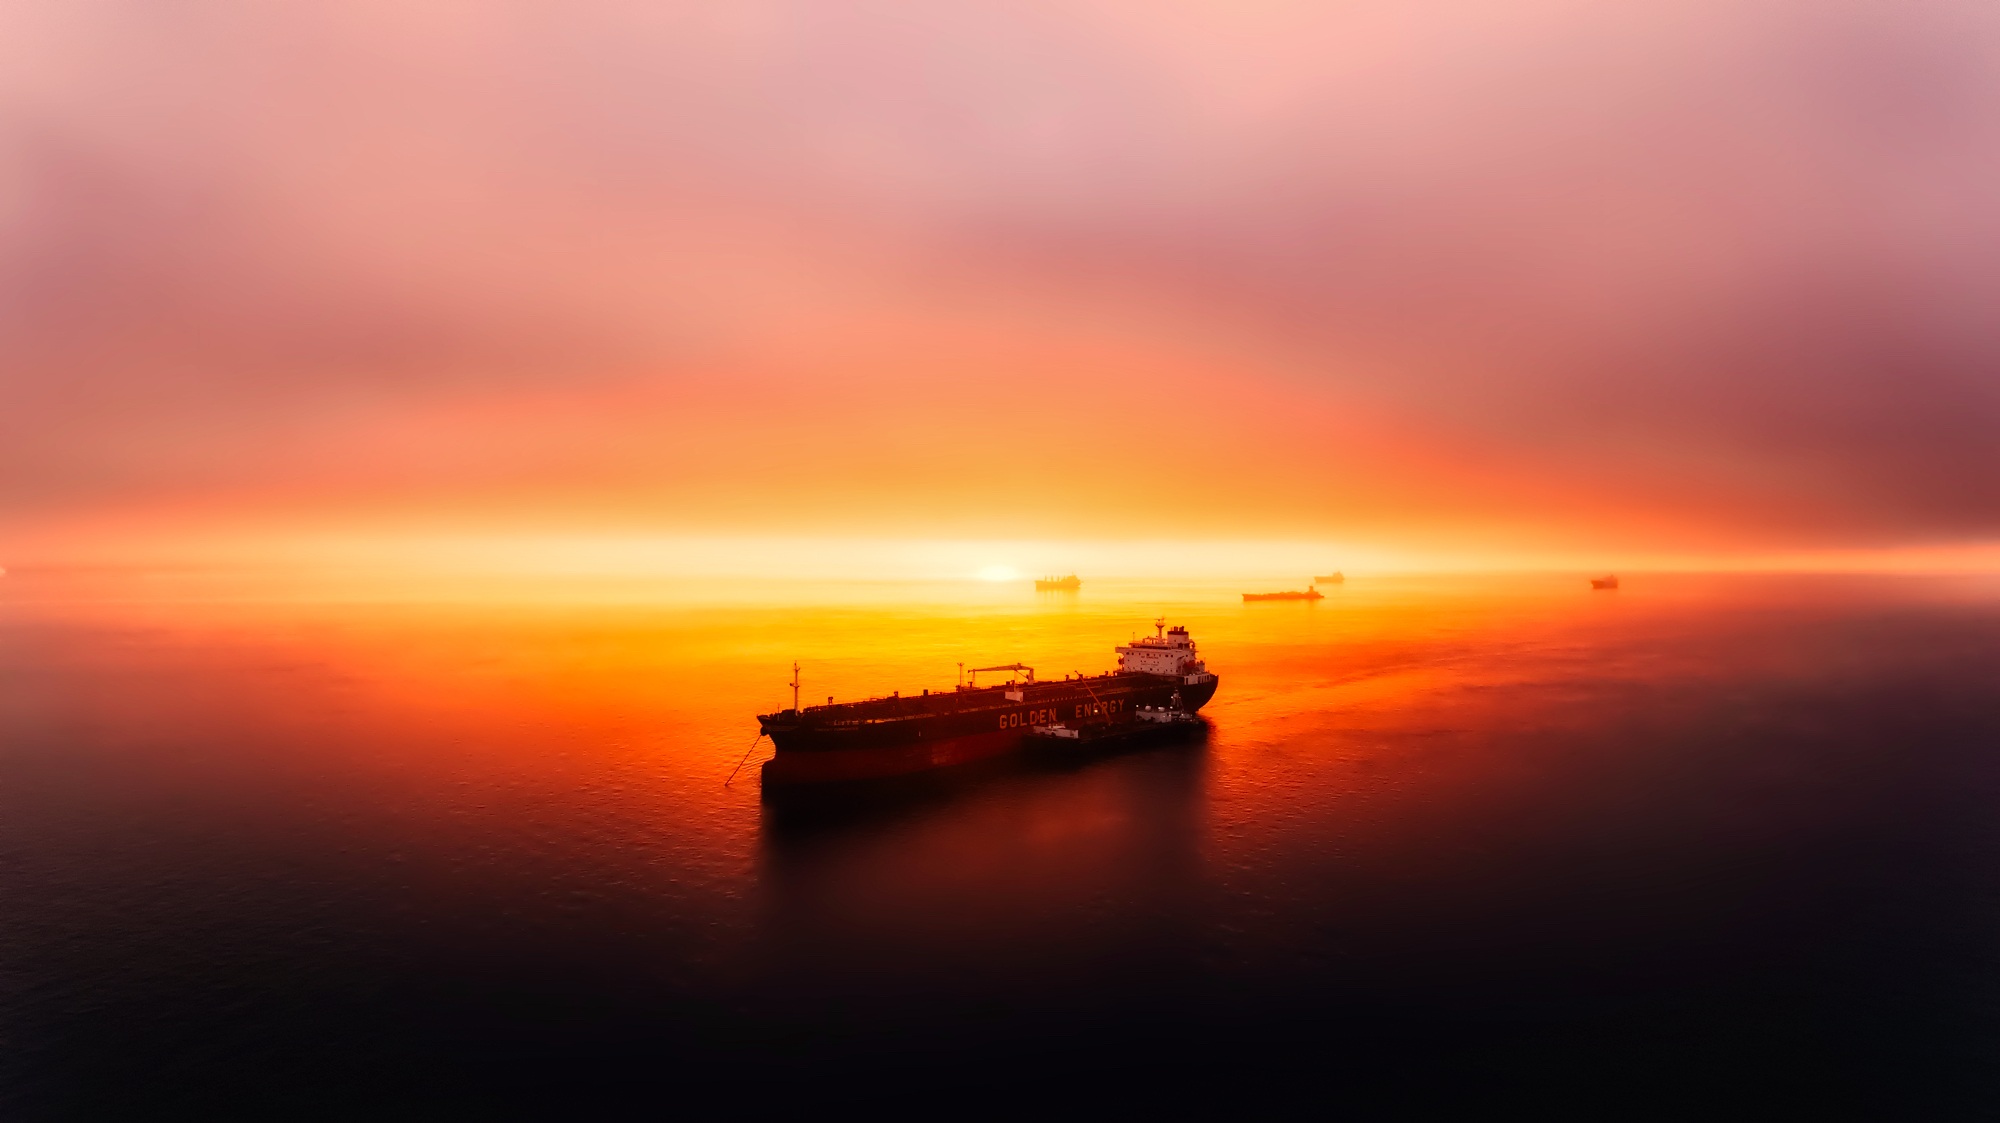 General 2000x1123 photography oil tanker sunset sea